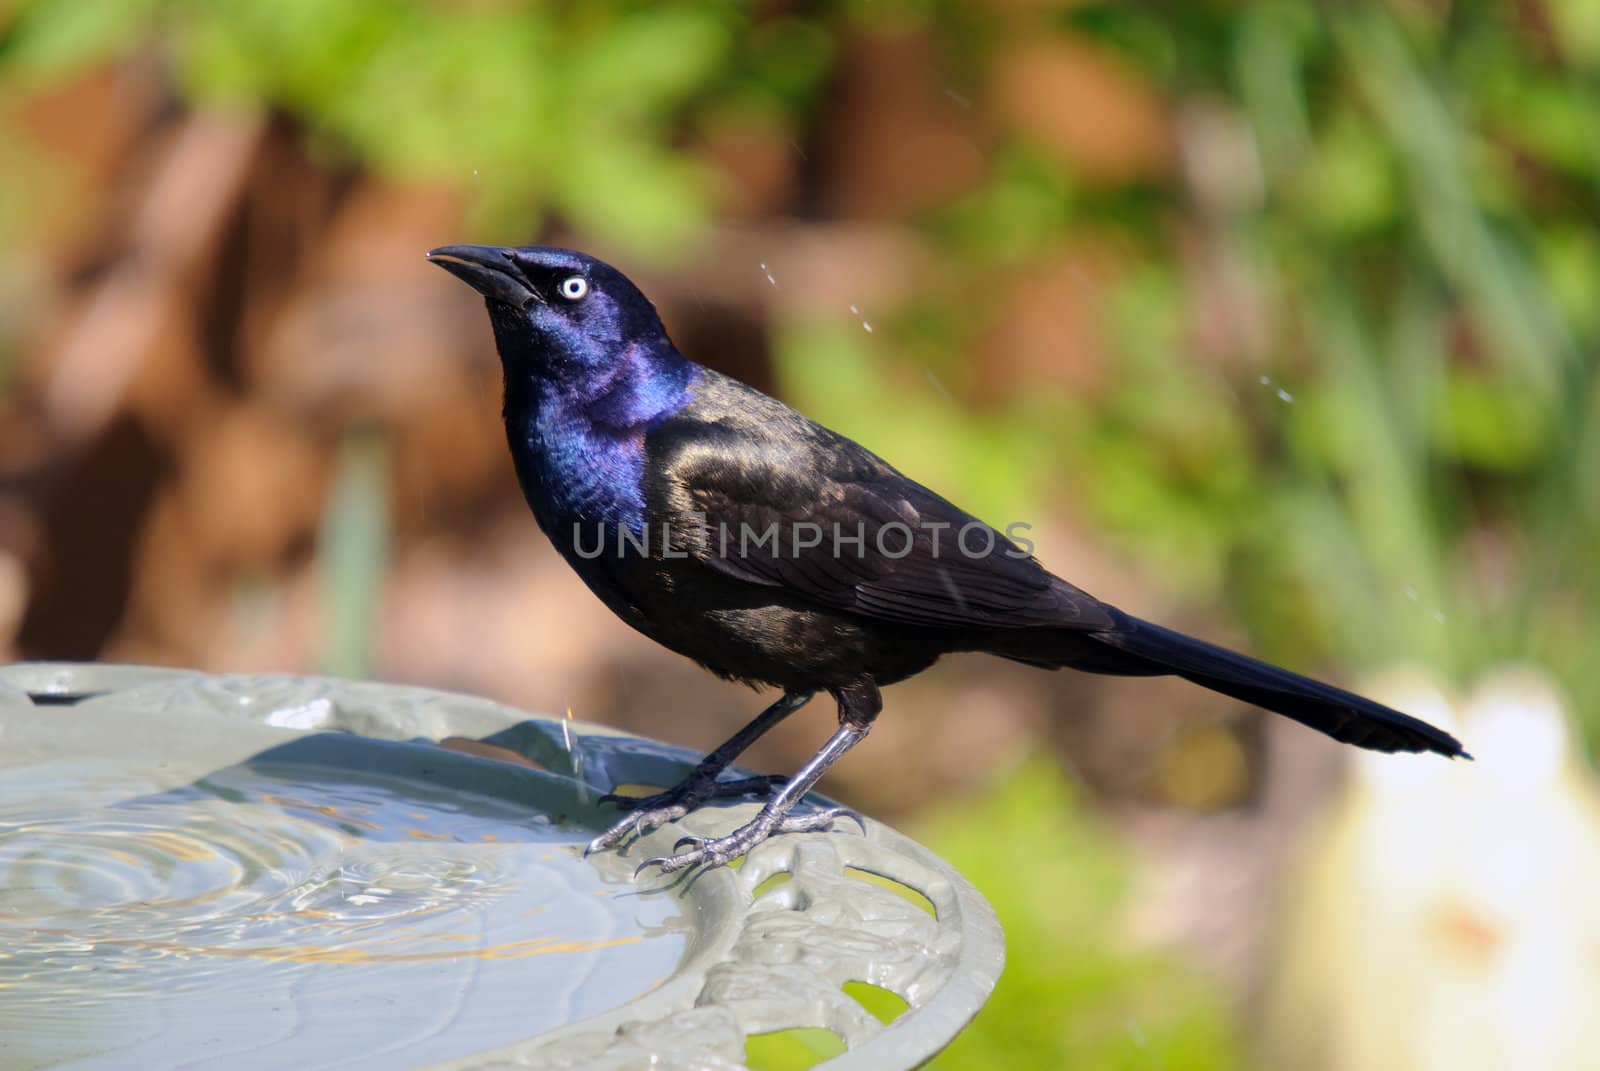 Common Grackle by nialat